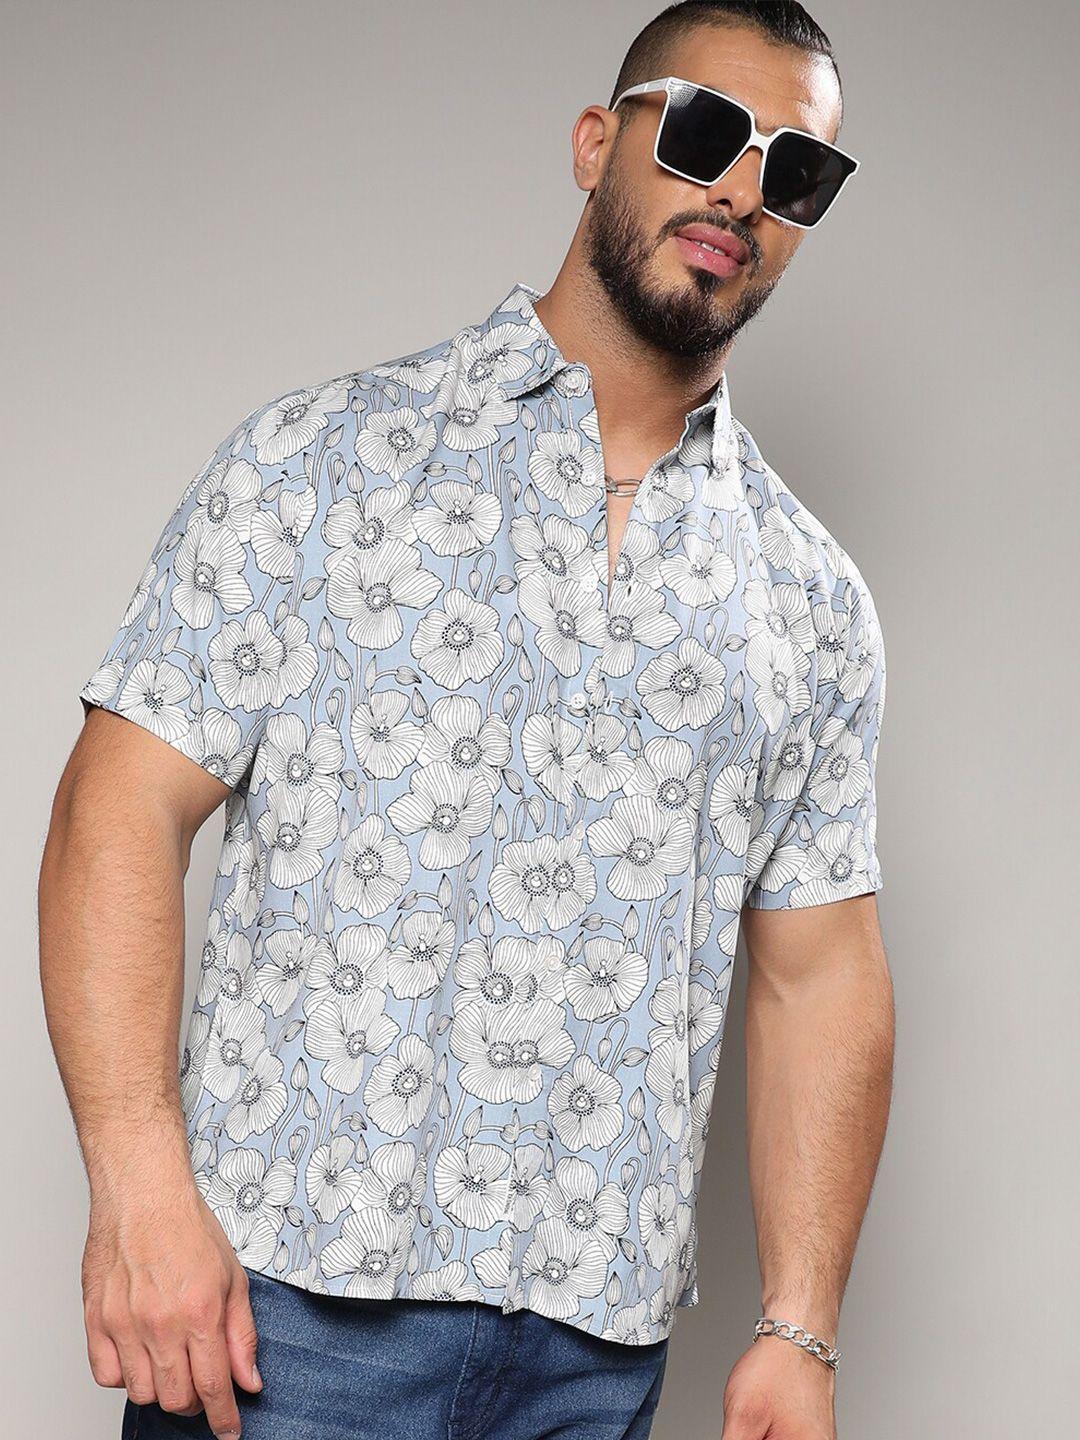 instafab plus floral printed classic printed casual shirt